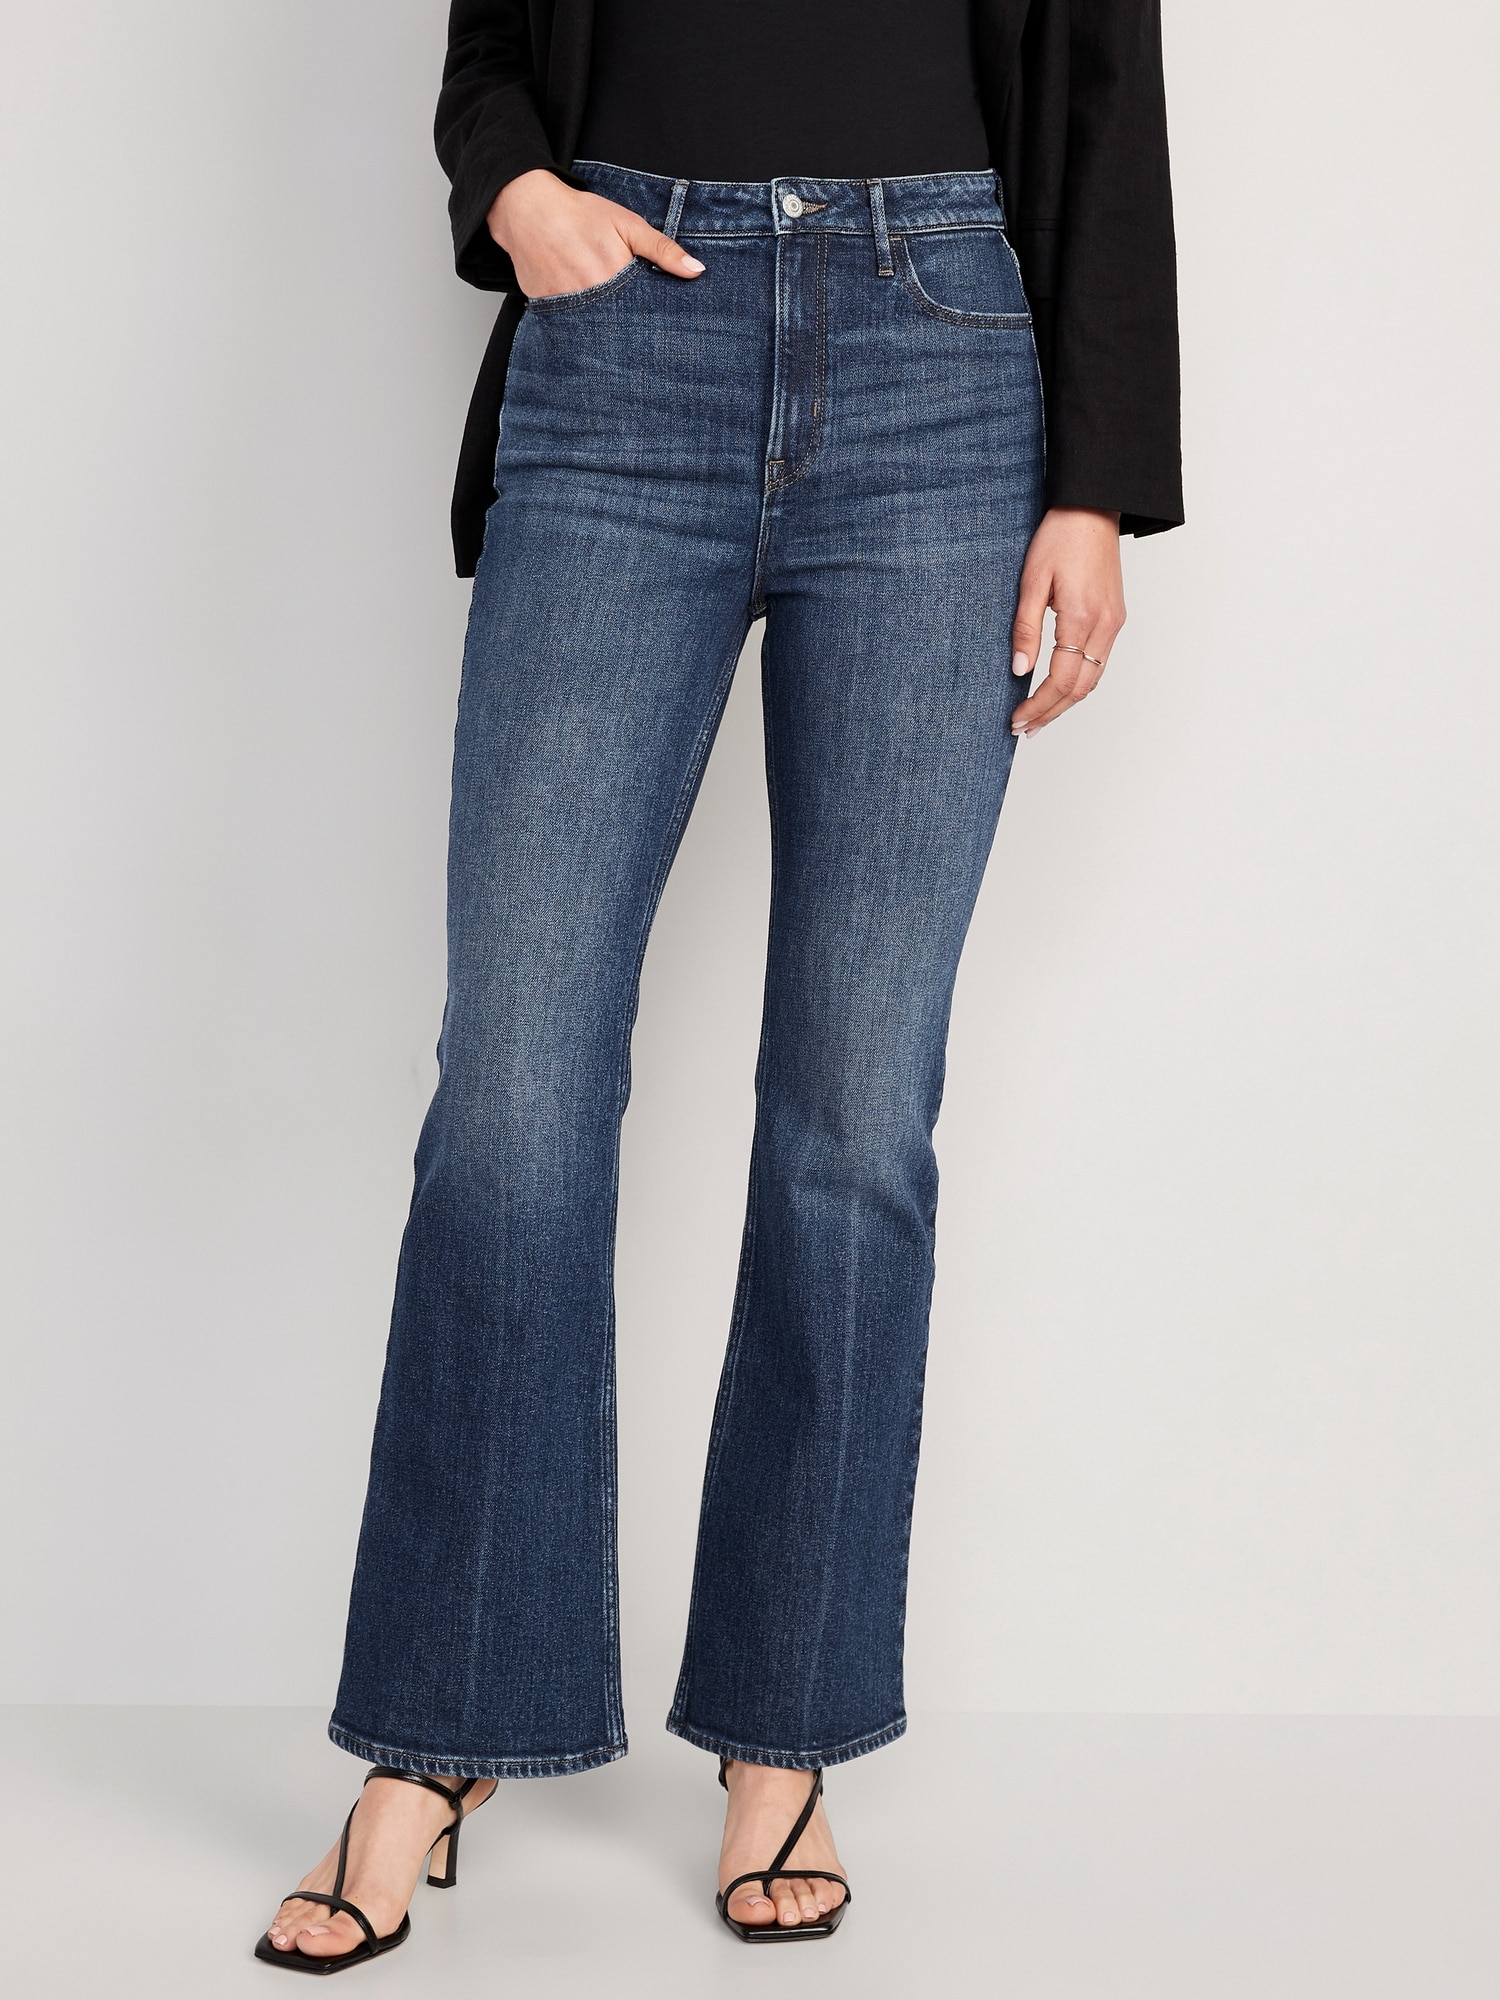 Best High-Waisted Jeans From Old Navy 2021